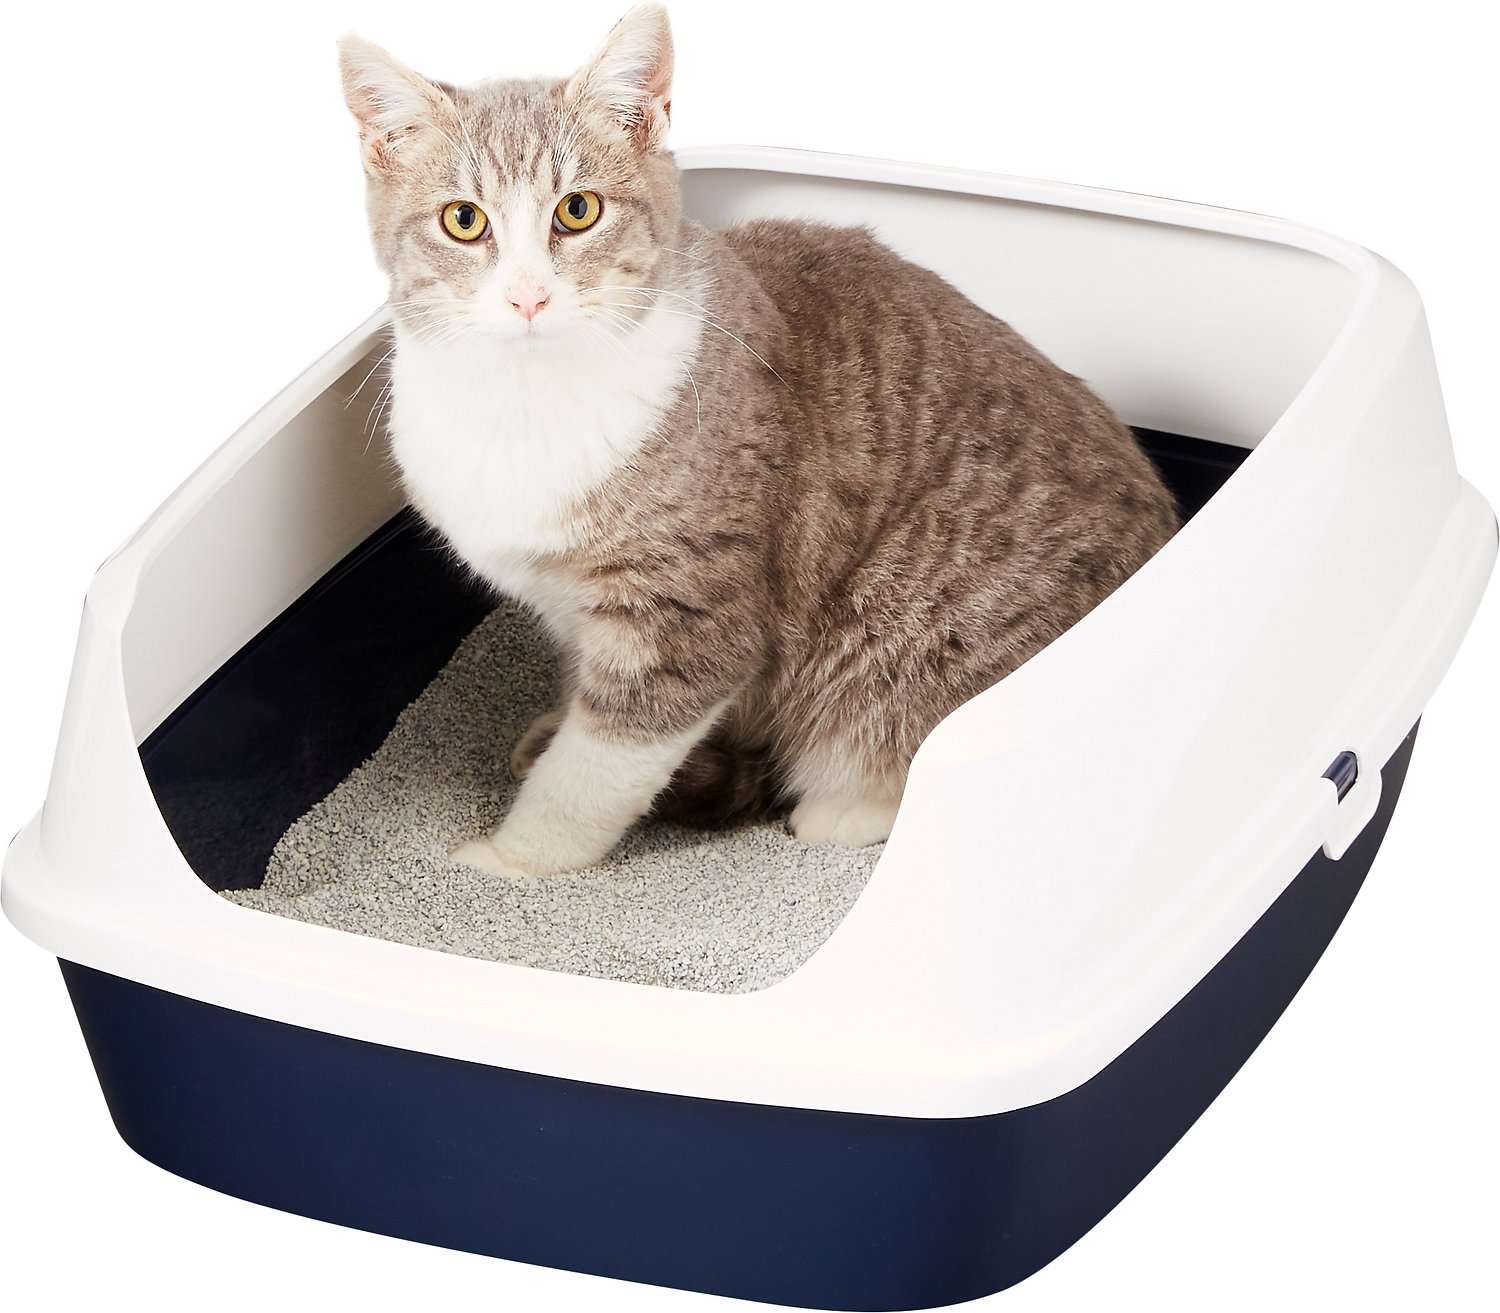 Frisco Open Top Cat Litter Box With Rim, Navy, Large 19